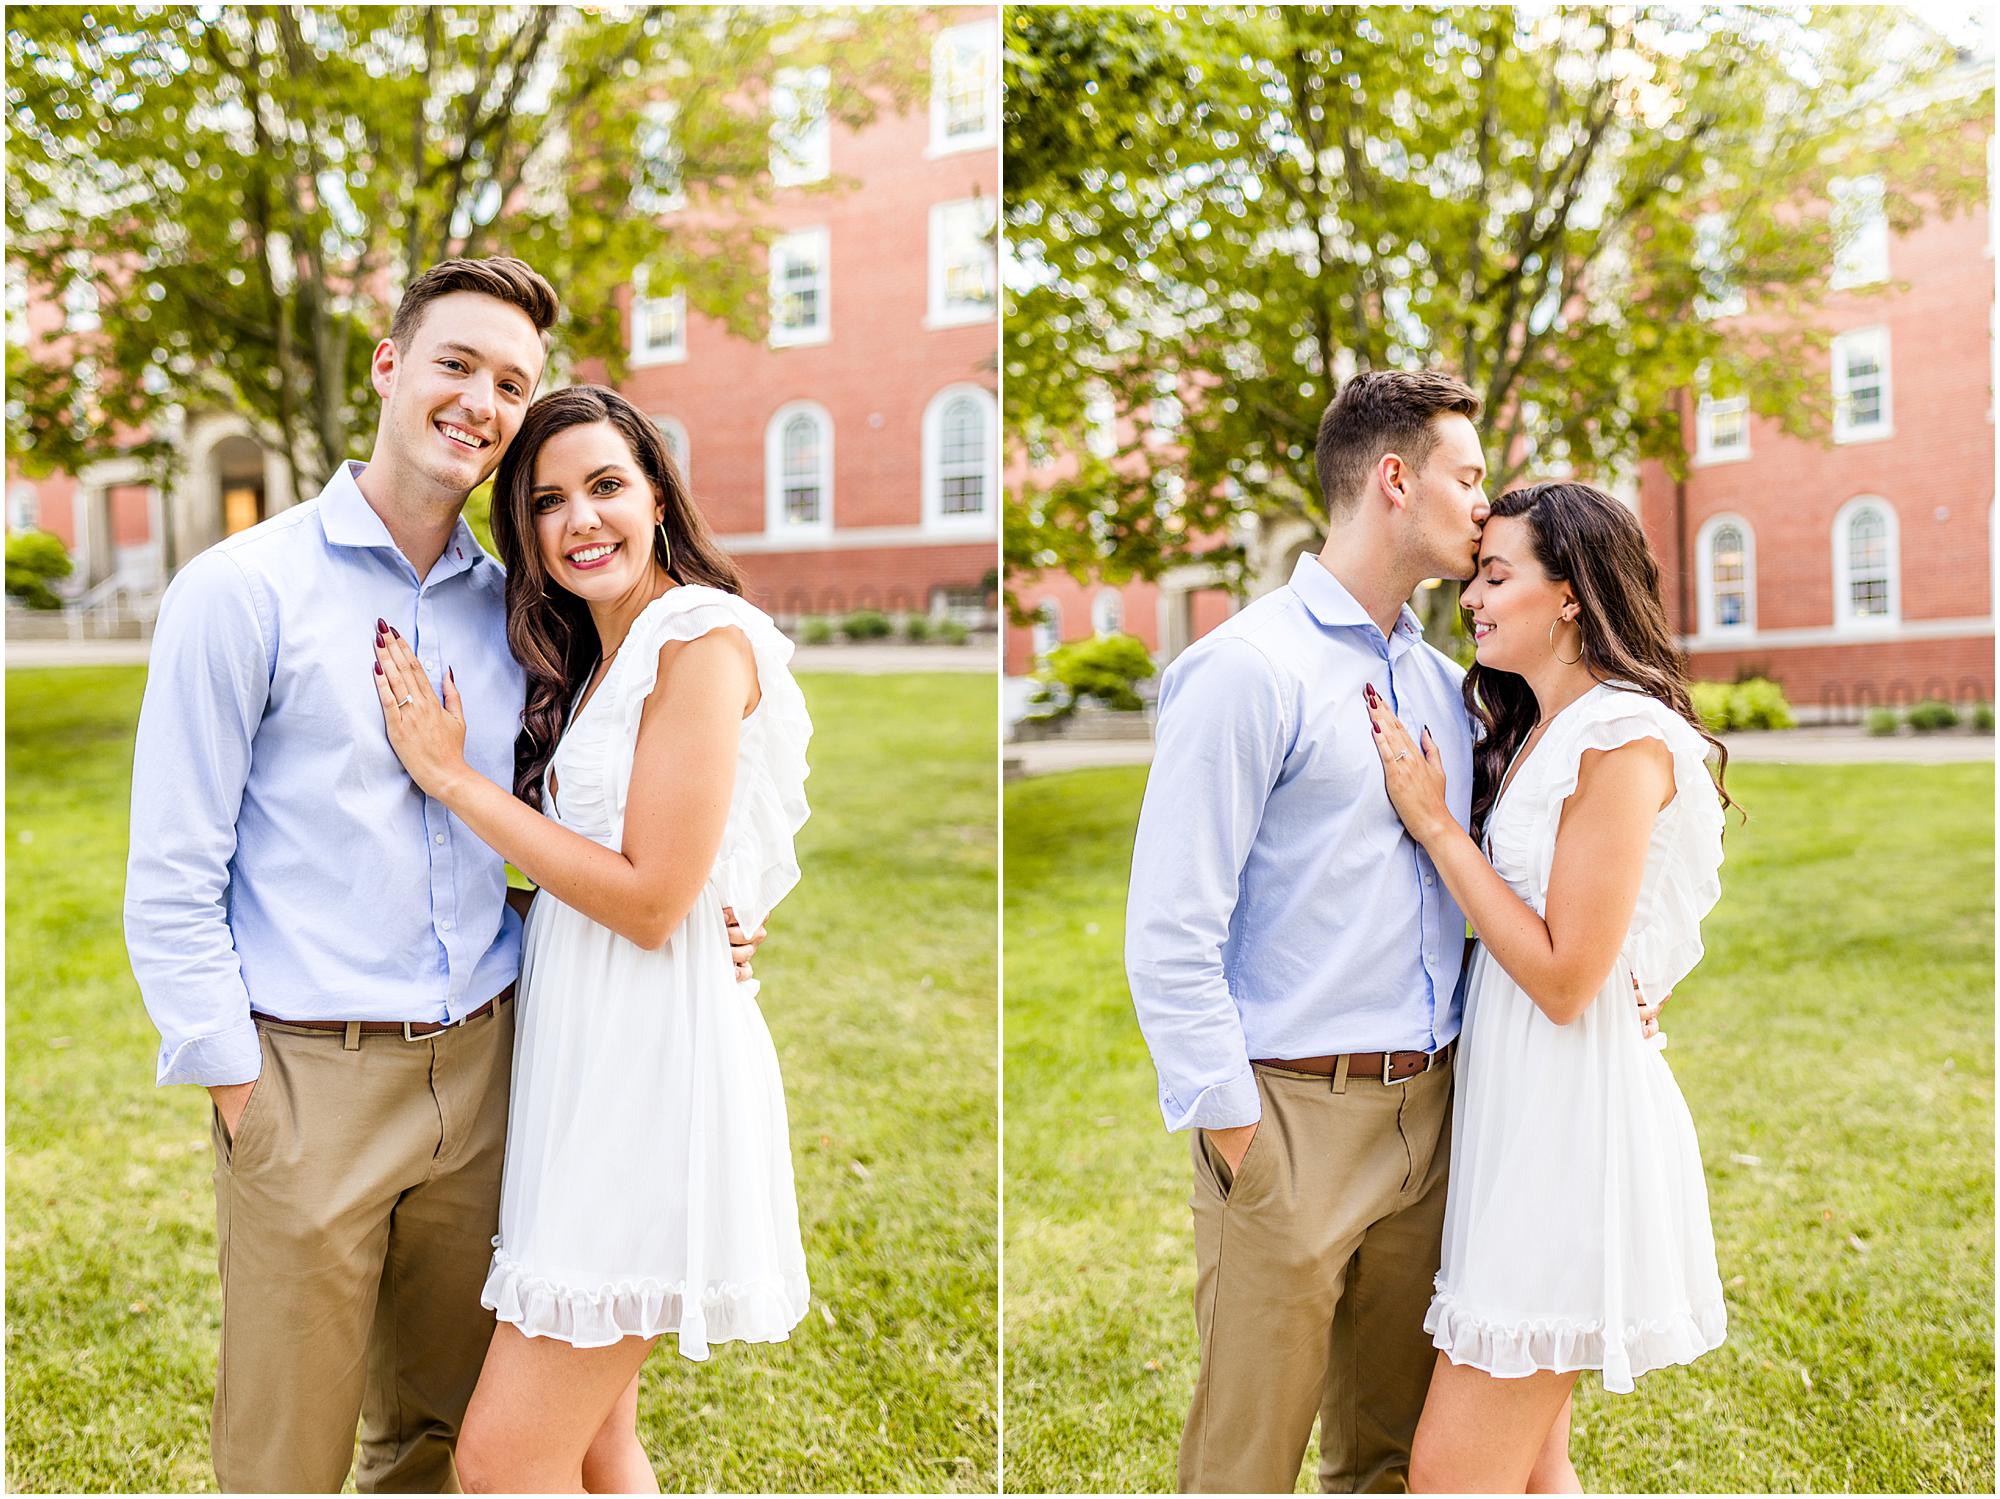 Caitlin-and-Luke-Photography-Illinois-State-University-Proposal-Photos-Normal-IL-engagement-session-Illinois-State-proposal_1087.jpg